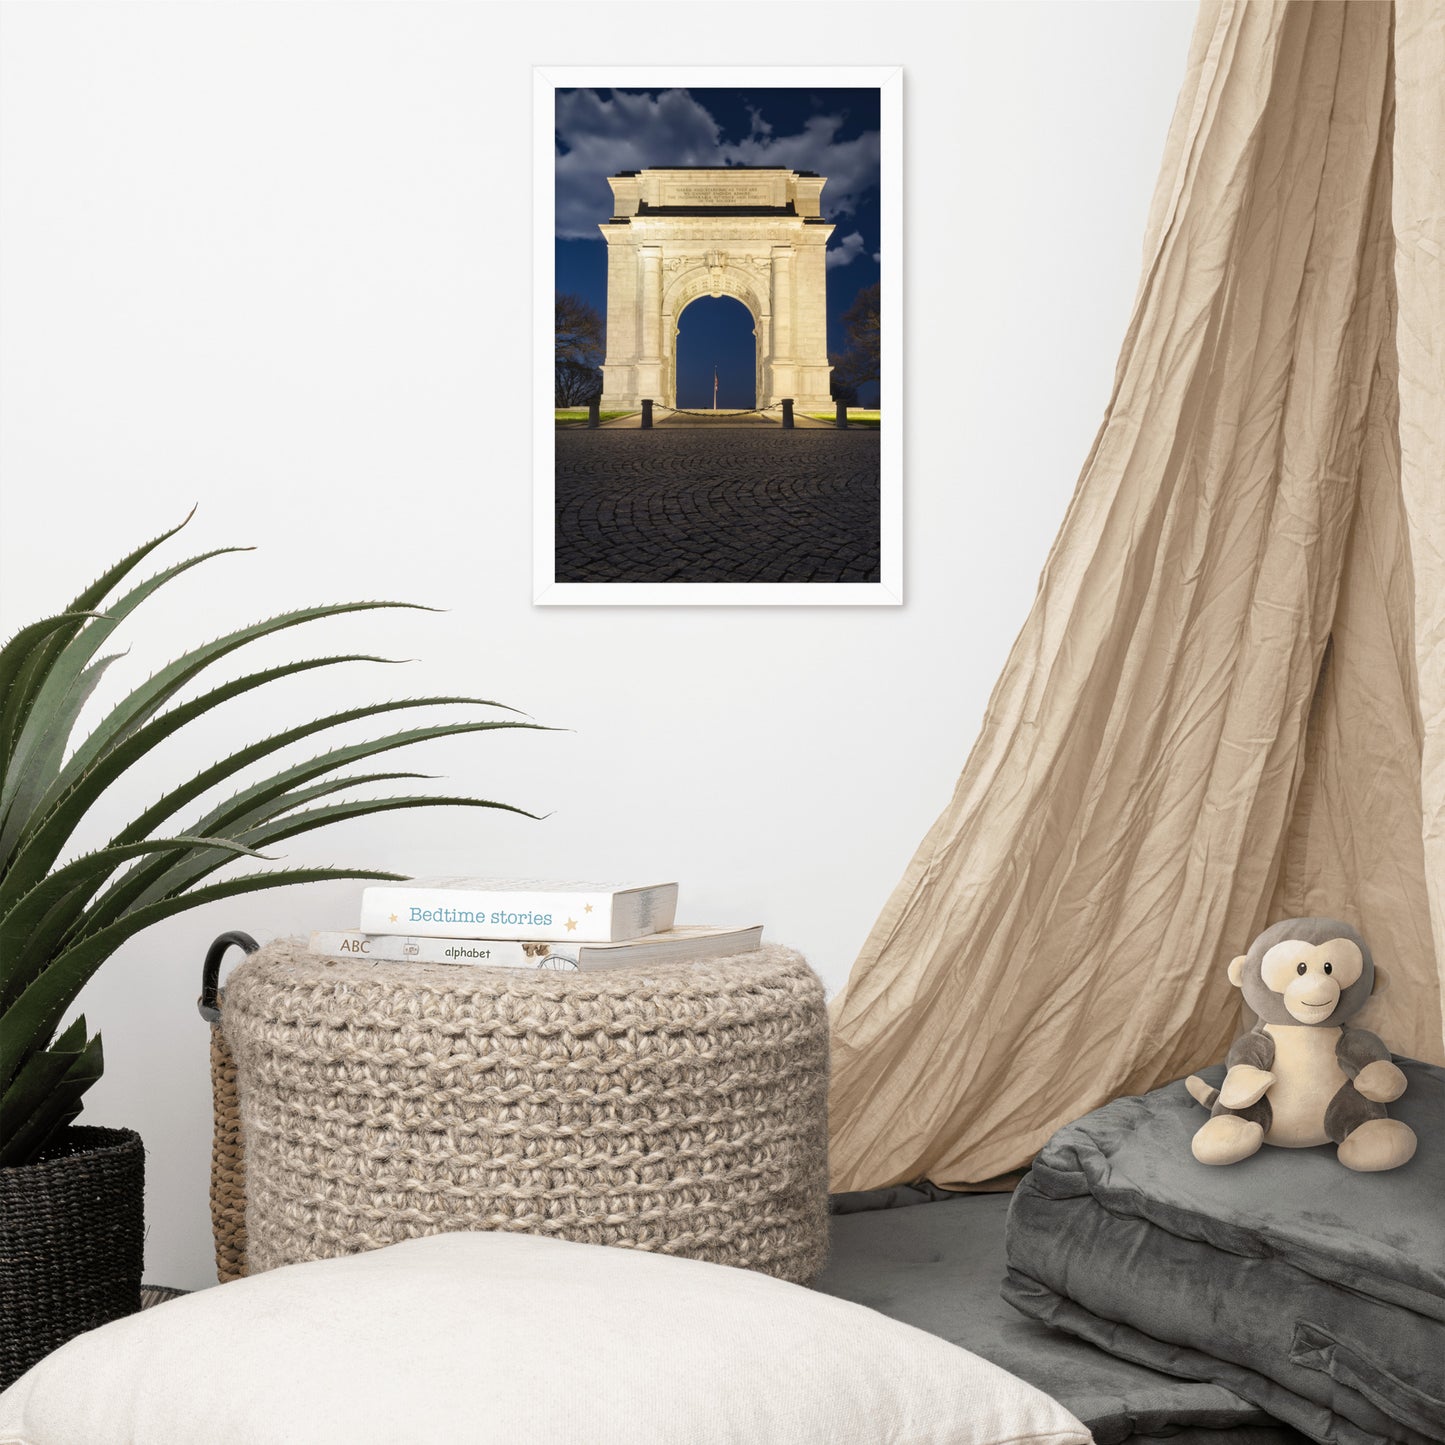 Night Photo At Valley Forge Arch Urban Landscape Photo Framed Wall Art Print